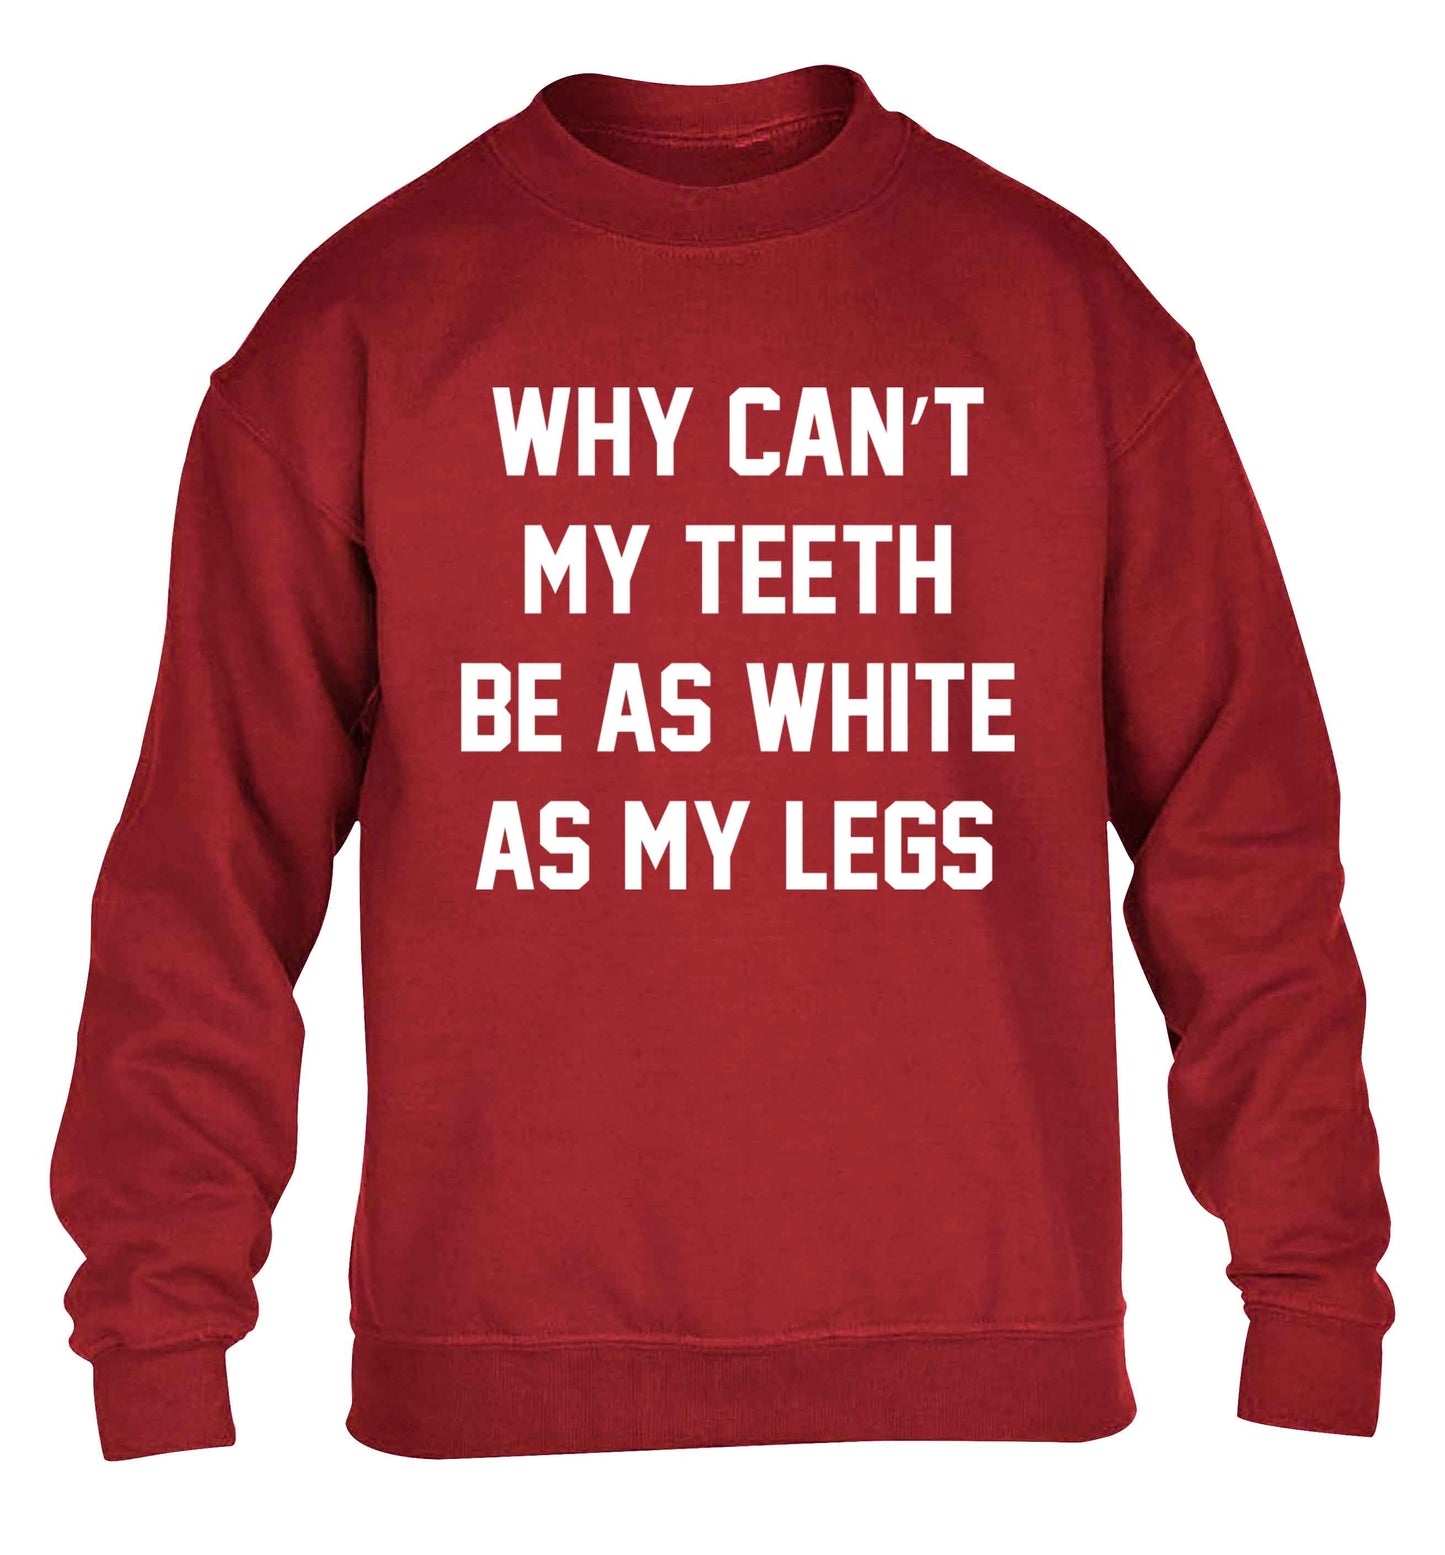 Why can't my teeth be as white as my legs children's grey sweater 12-13 Years